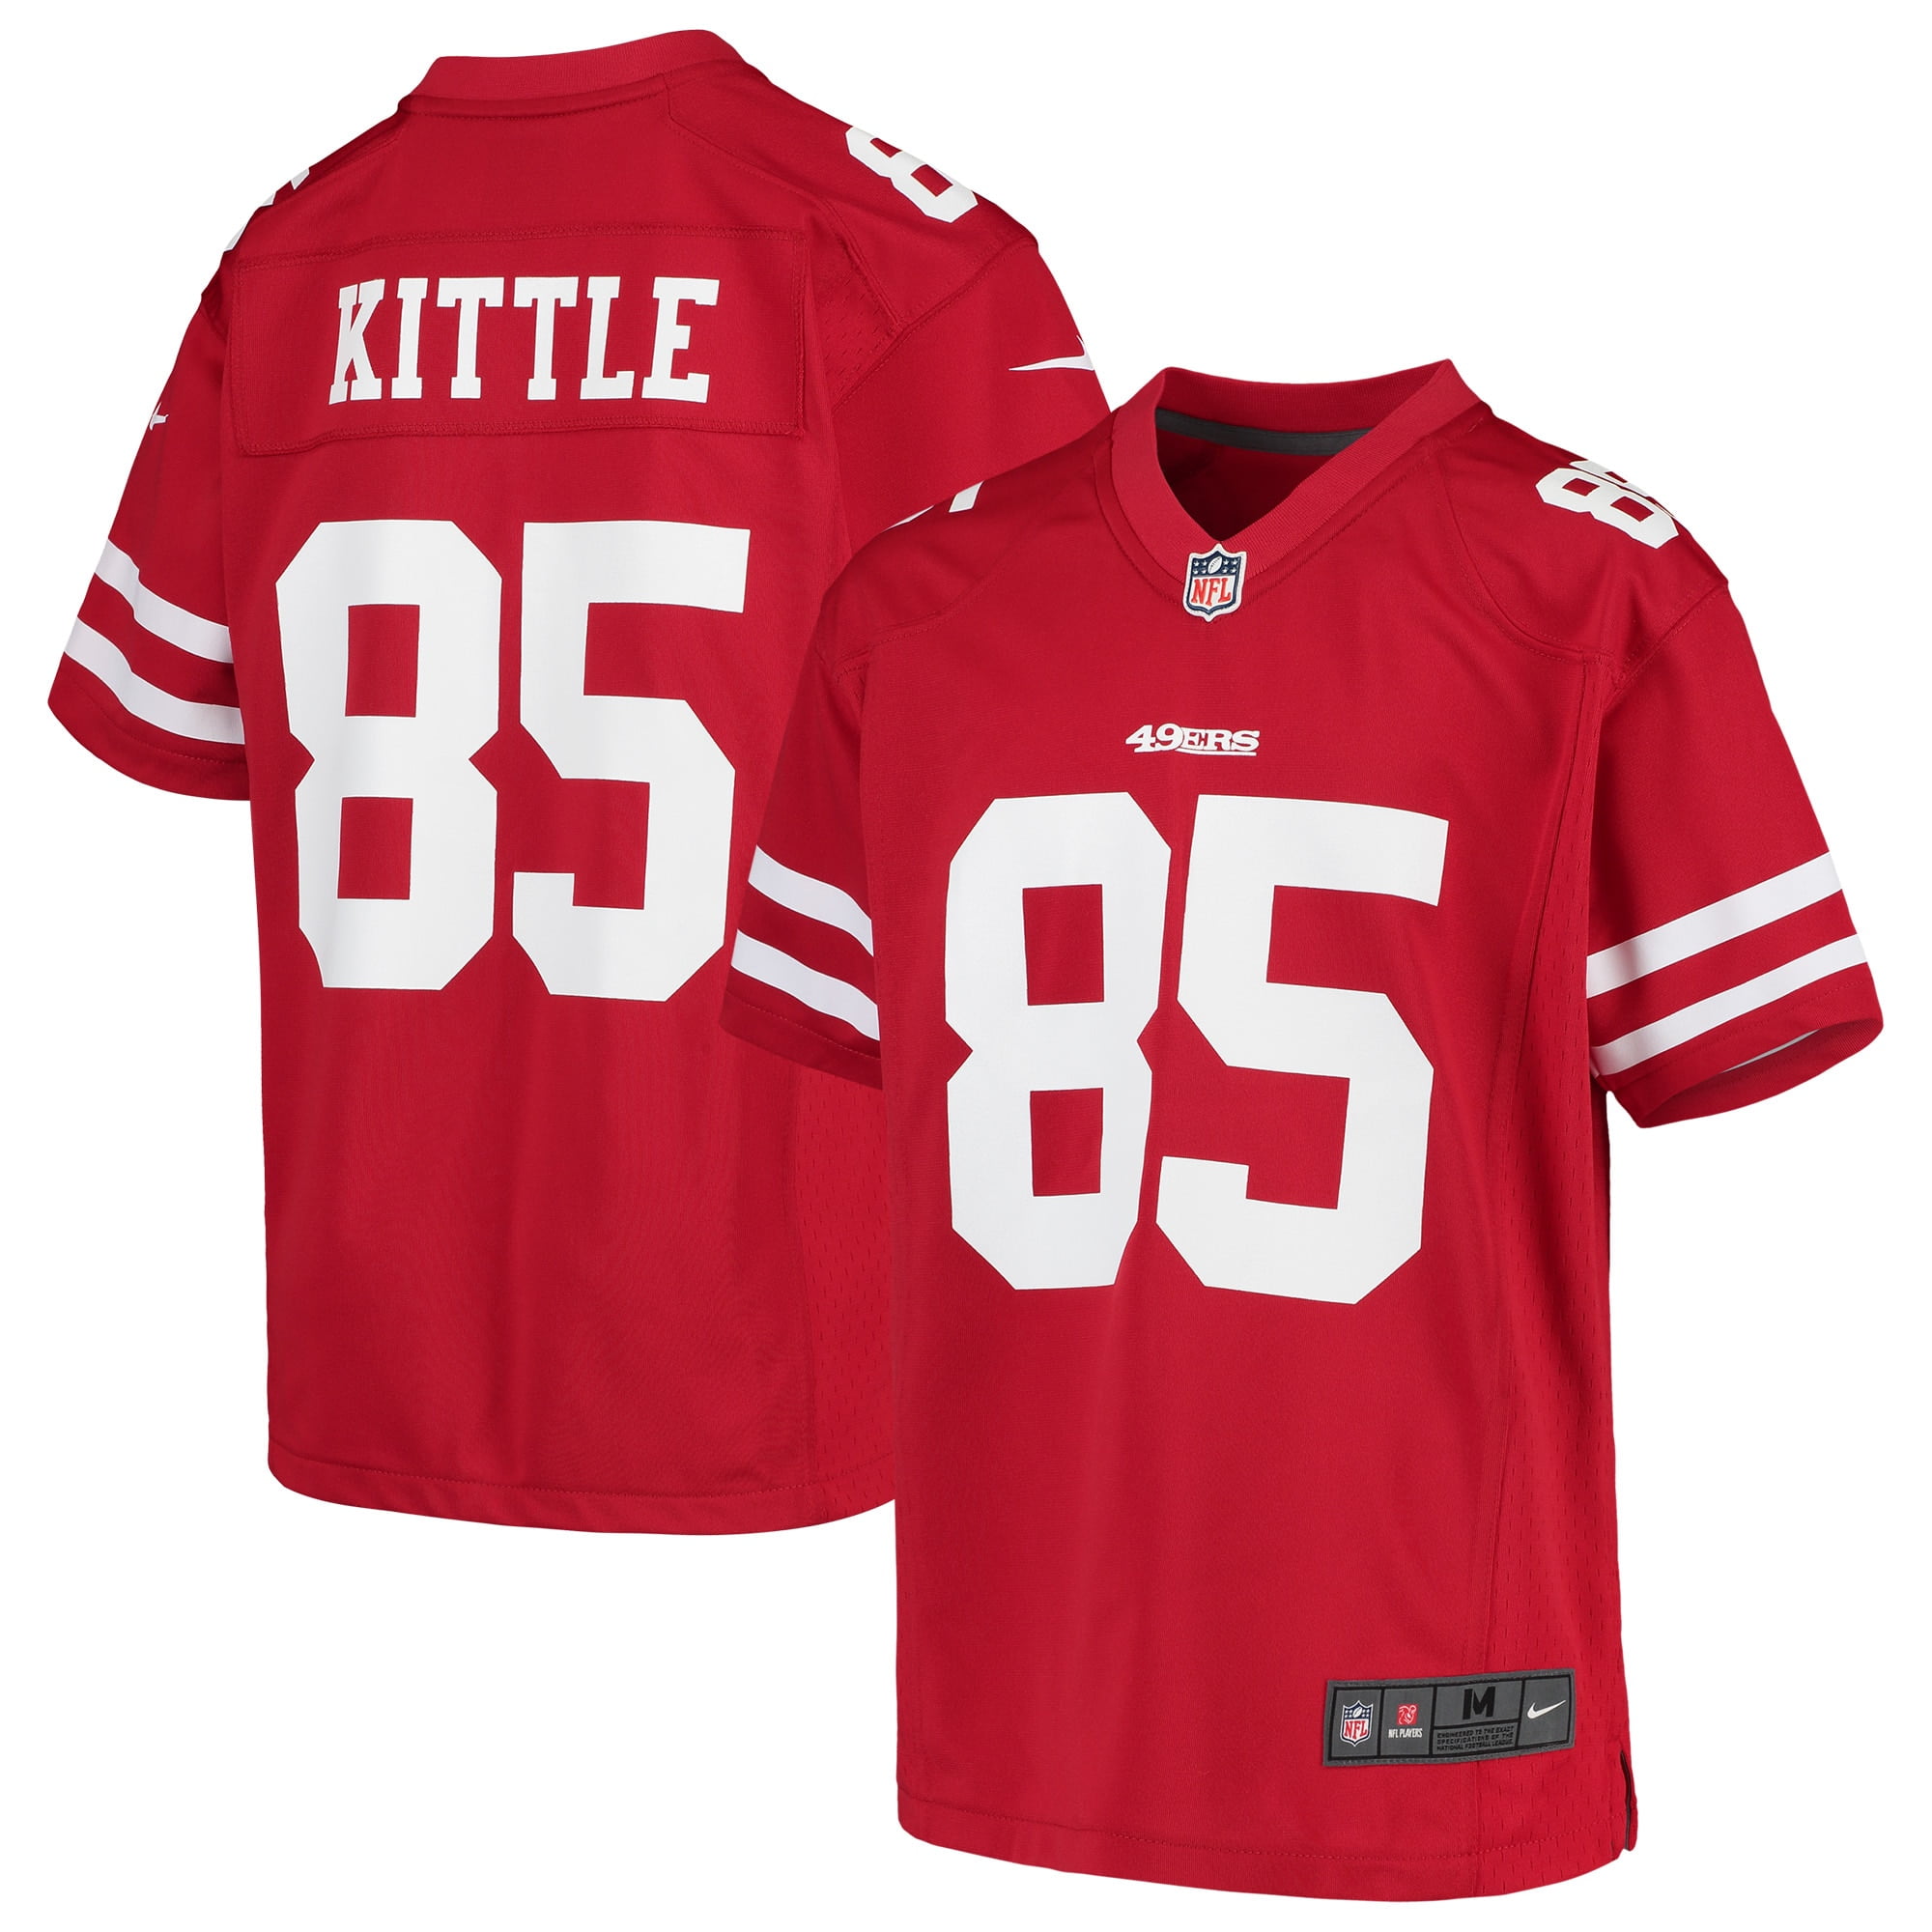 49ers game jersey